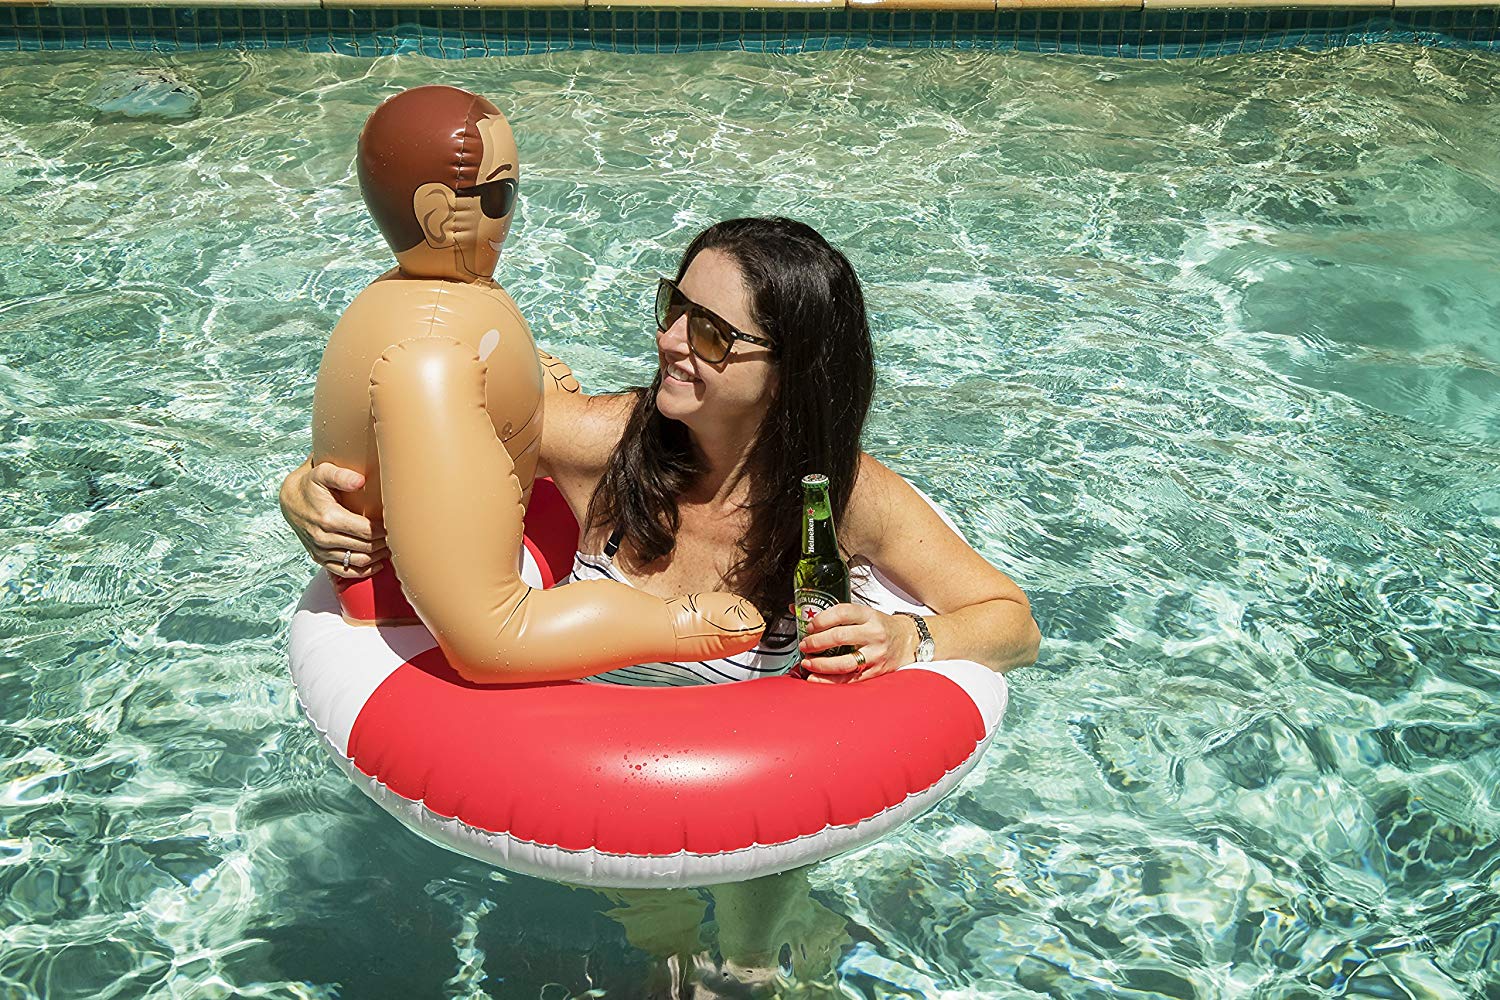 This Inflatable Hunk Pool Float Wants To Be Your Summer Boyfriend